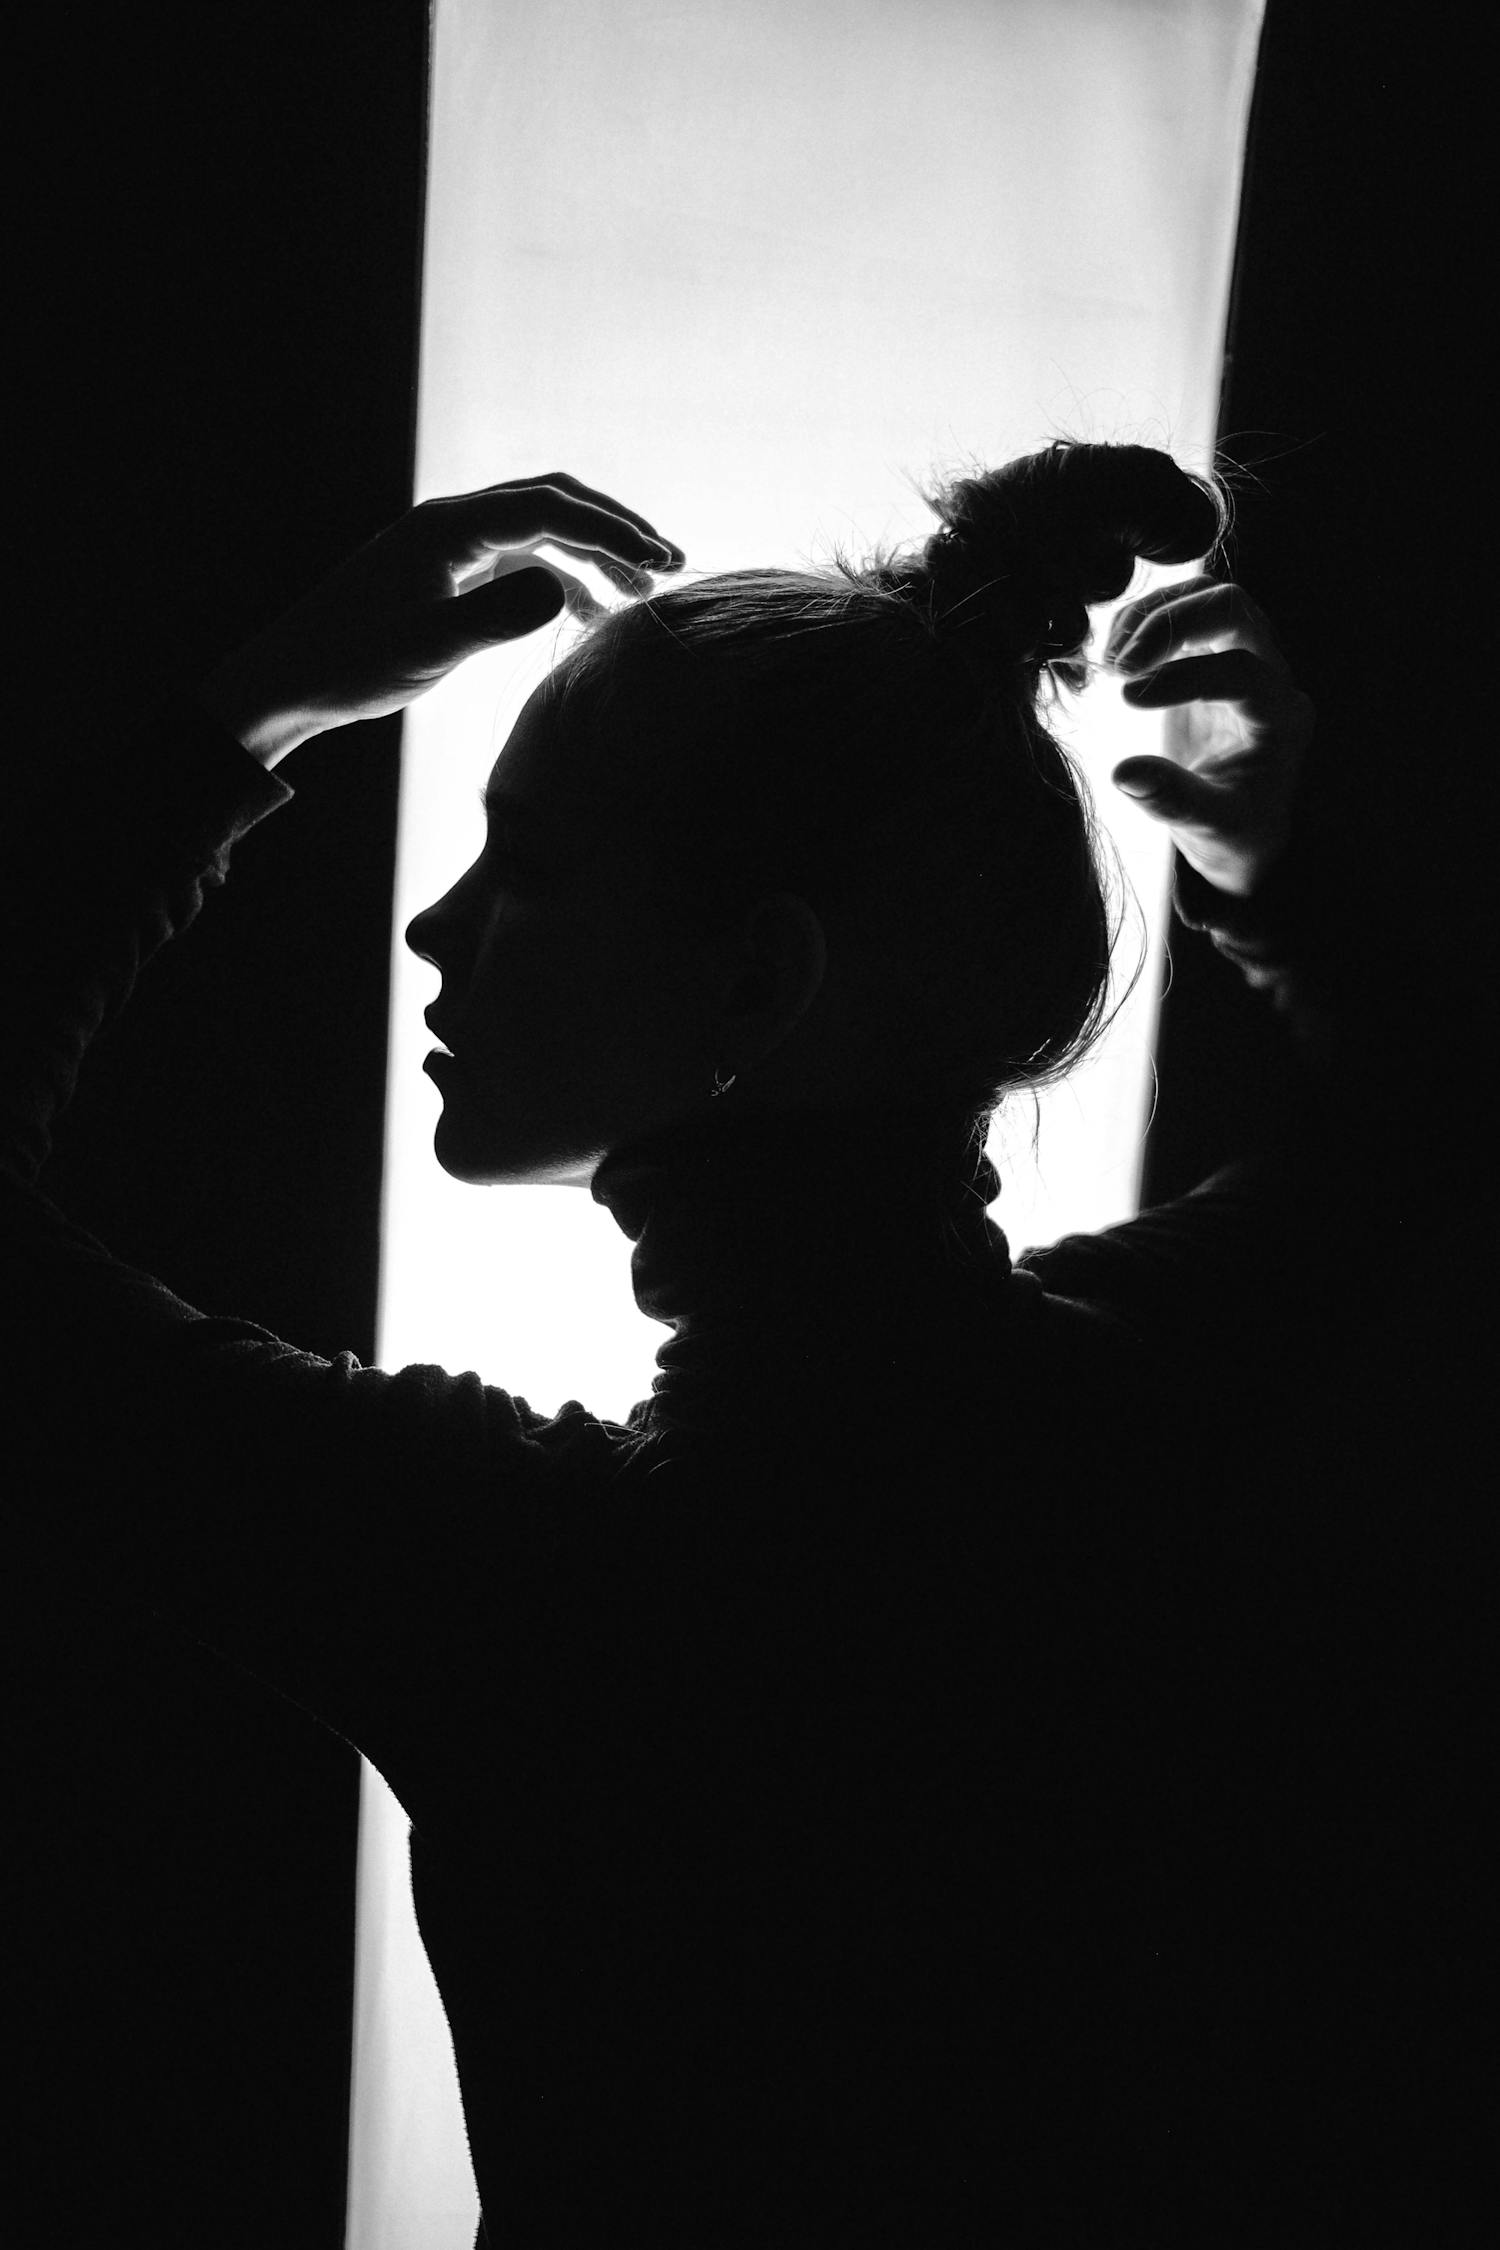 A Silhouette of a Person with Raised Arms